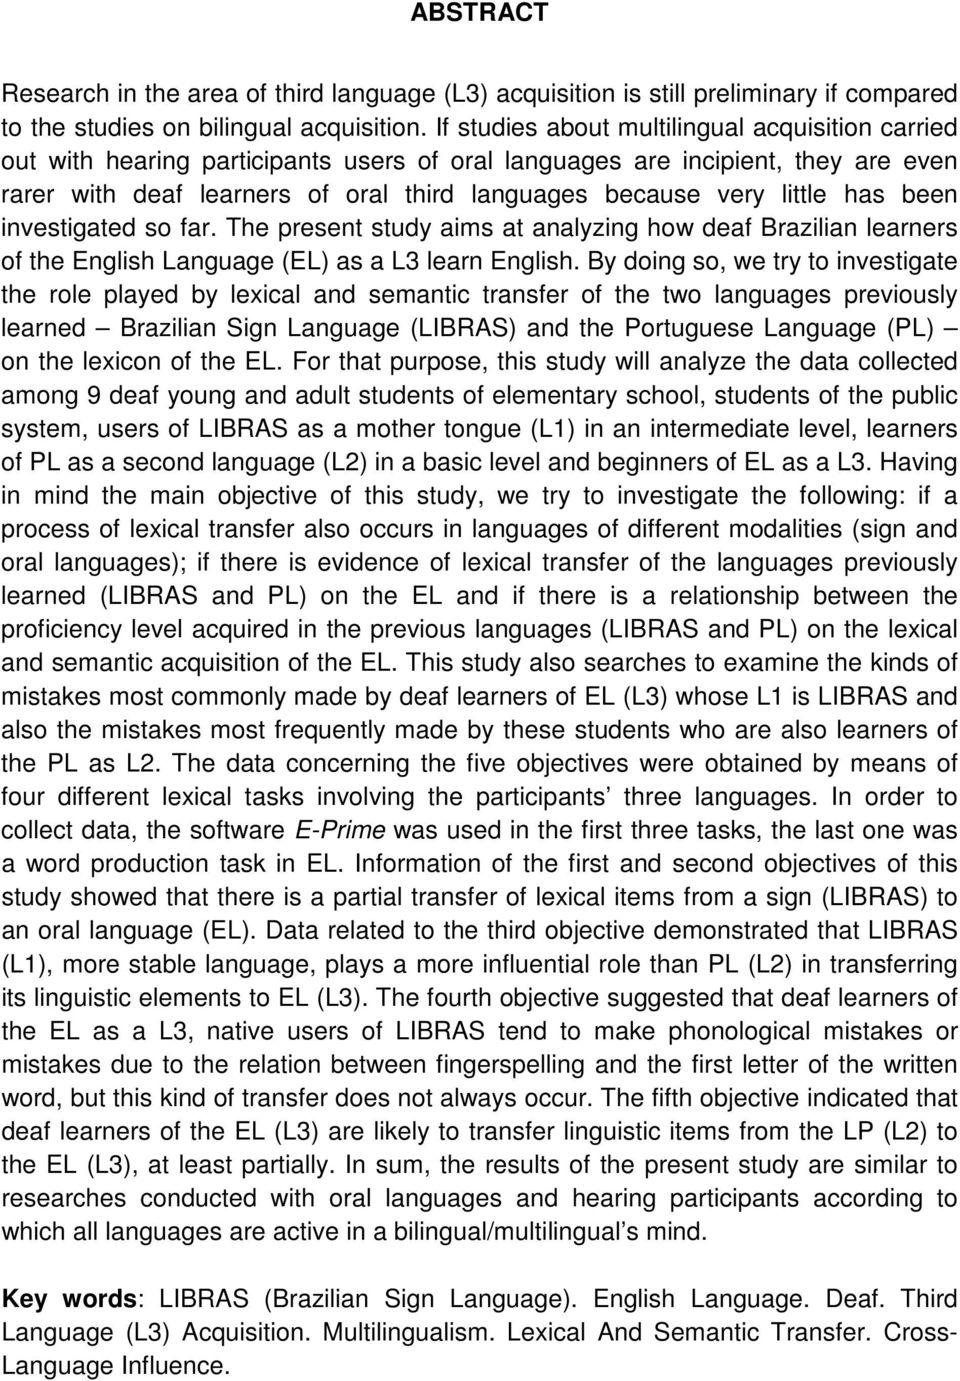 little has been investigated so far. The present study aims at analyzing how deaf Brazilian learners of the English Language (EL) as a L3 learn English.